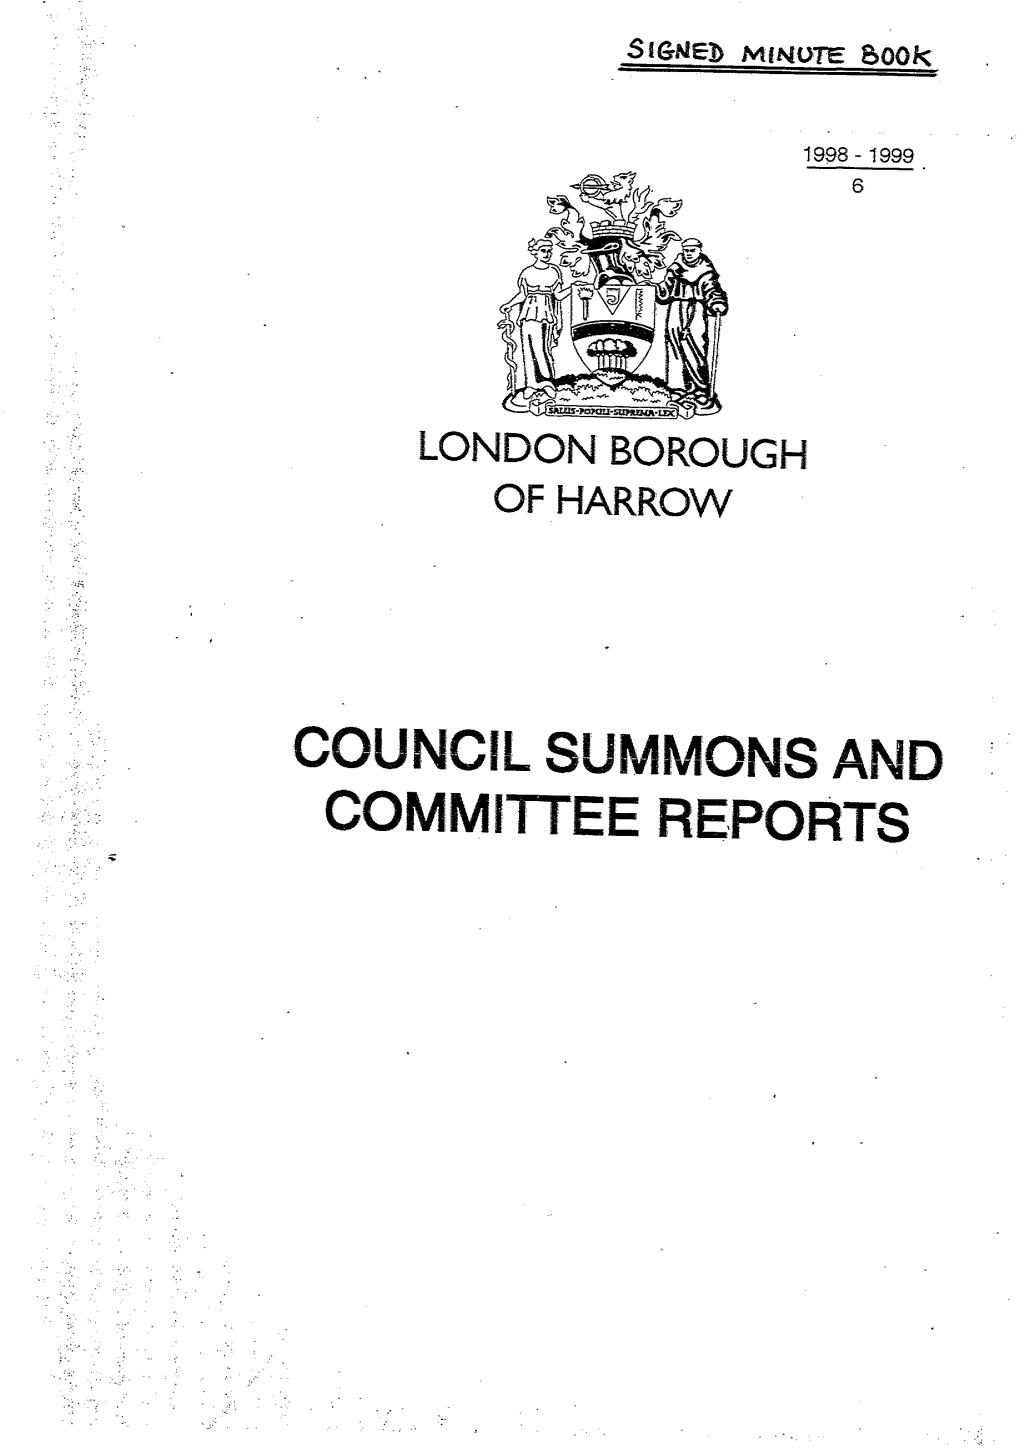 Council Summons and Committee Reports London Borough of Harrow